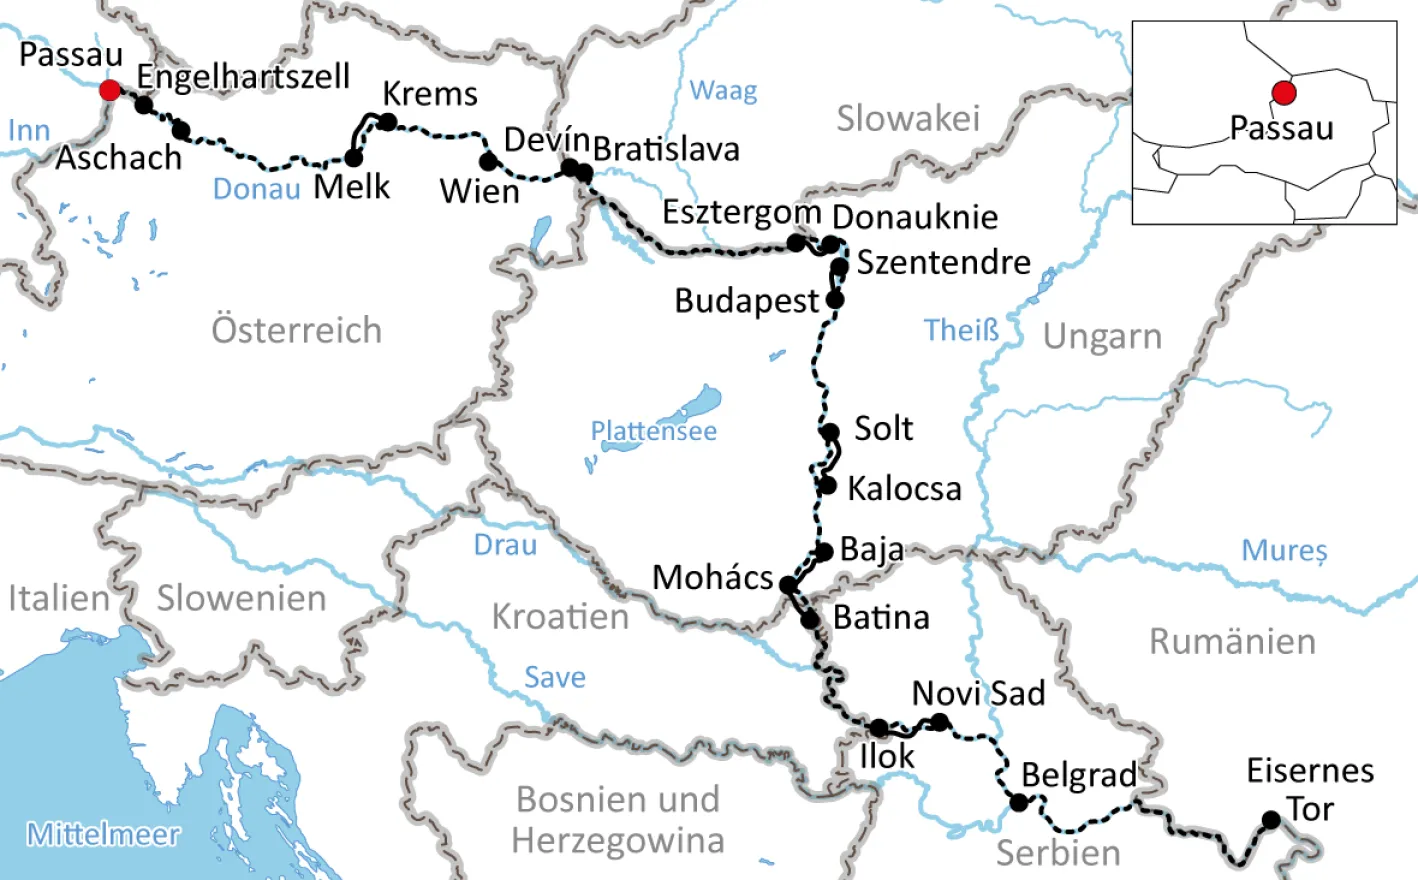 Map to By bike and boat from Passau to Belgrade